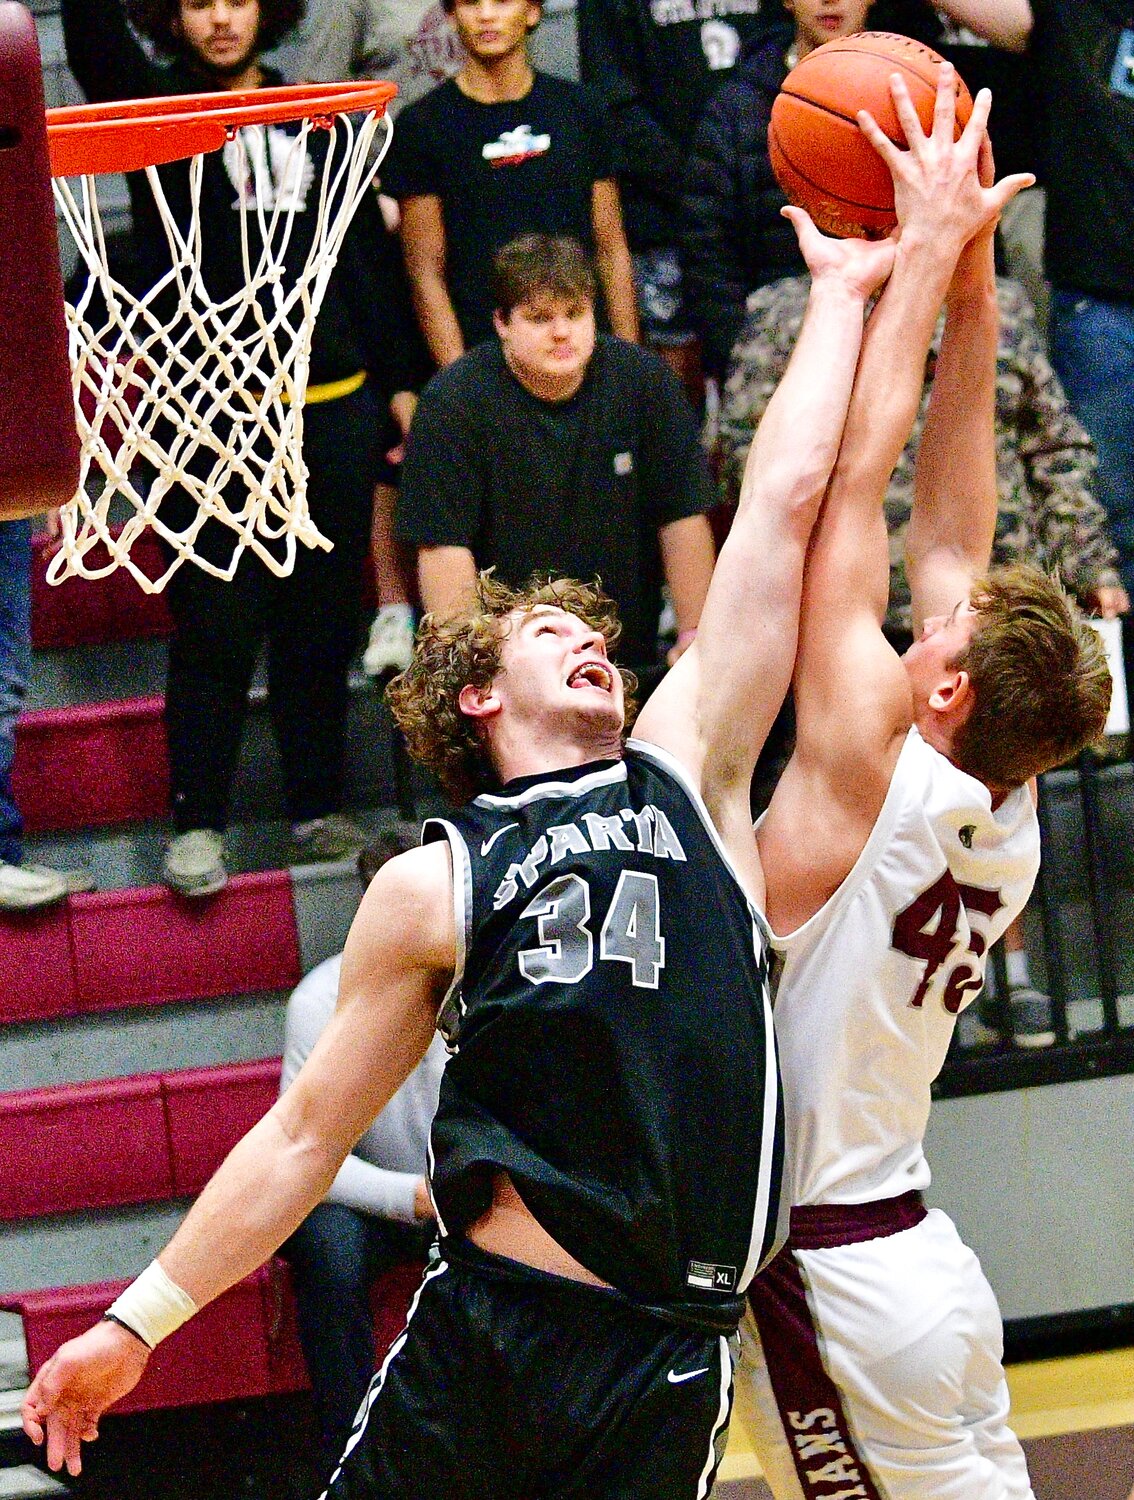 SPARTA'S JAKE LAFFERTY reaches for a rebound.